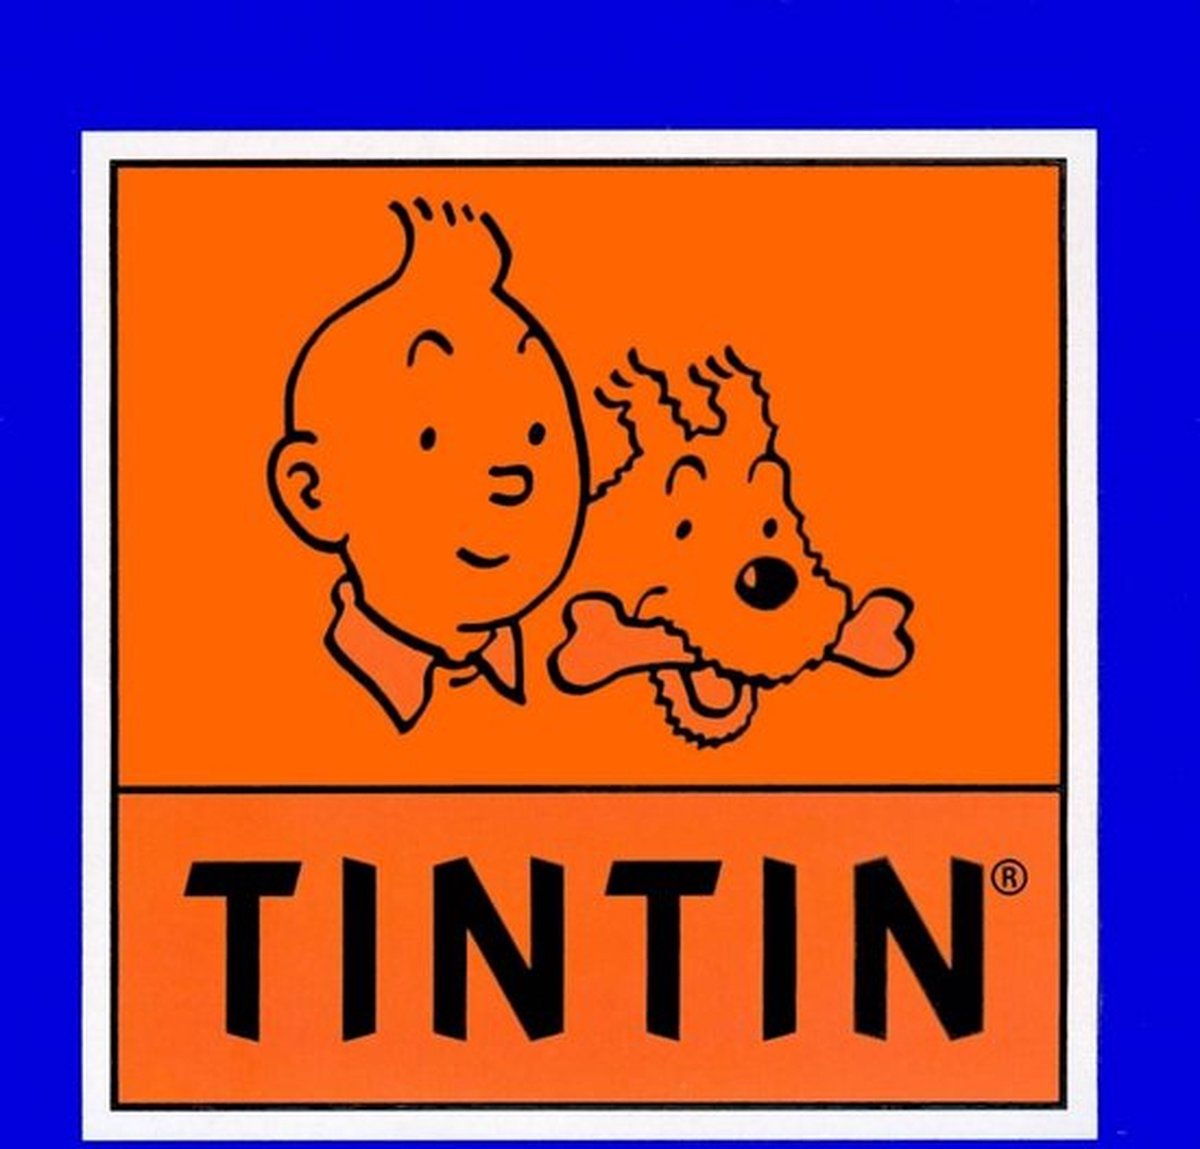 Tintin - The Adventures Tintin in America - English edition, black and white drawings. Official Tintin edition. -  - Gadgetz Home